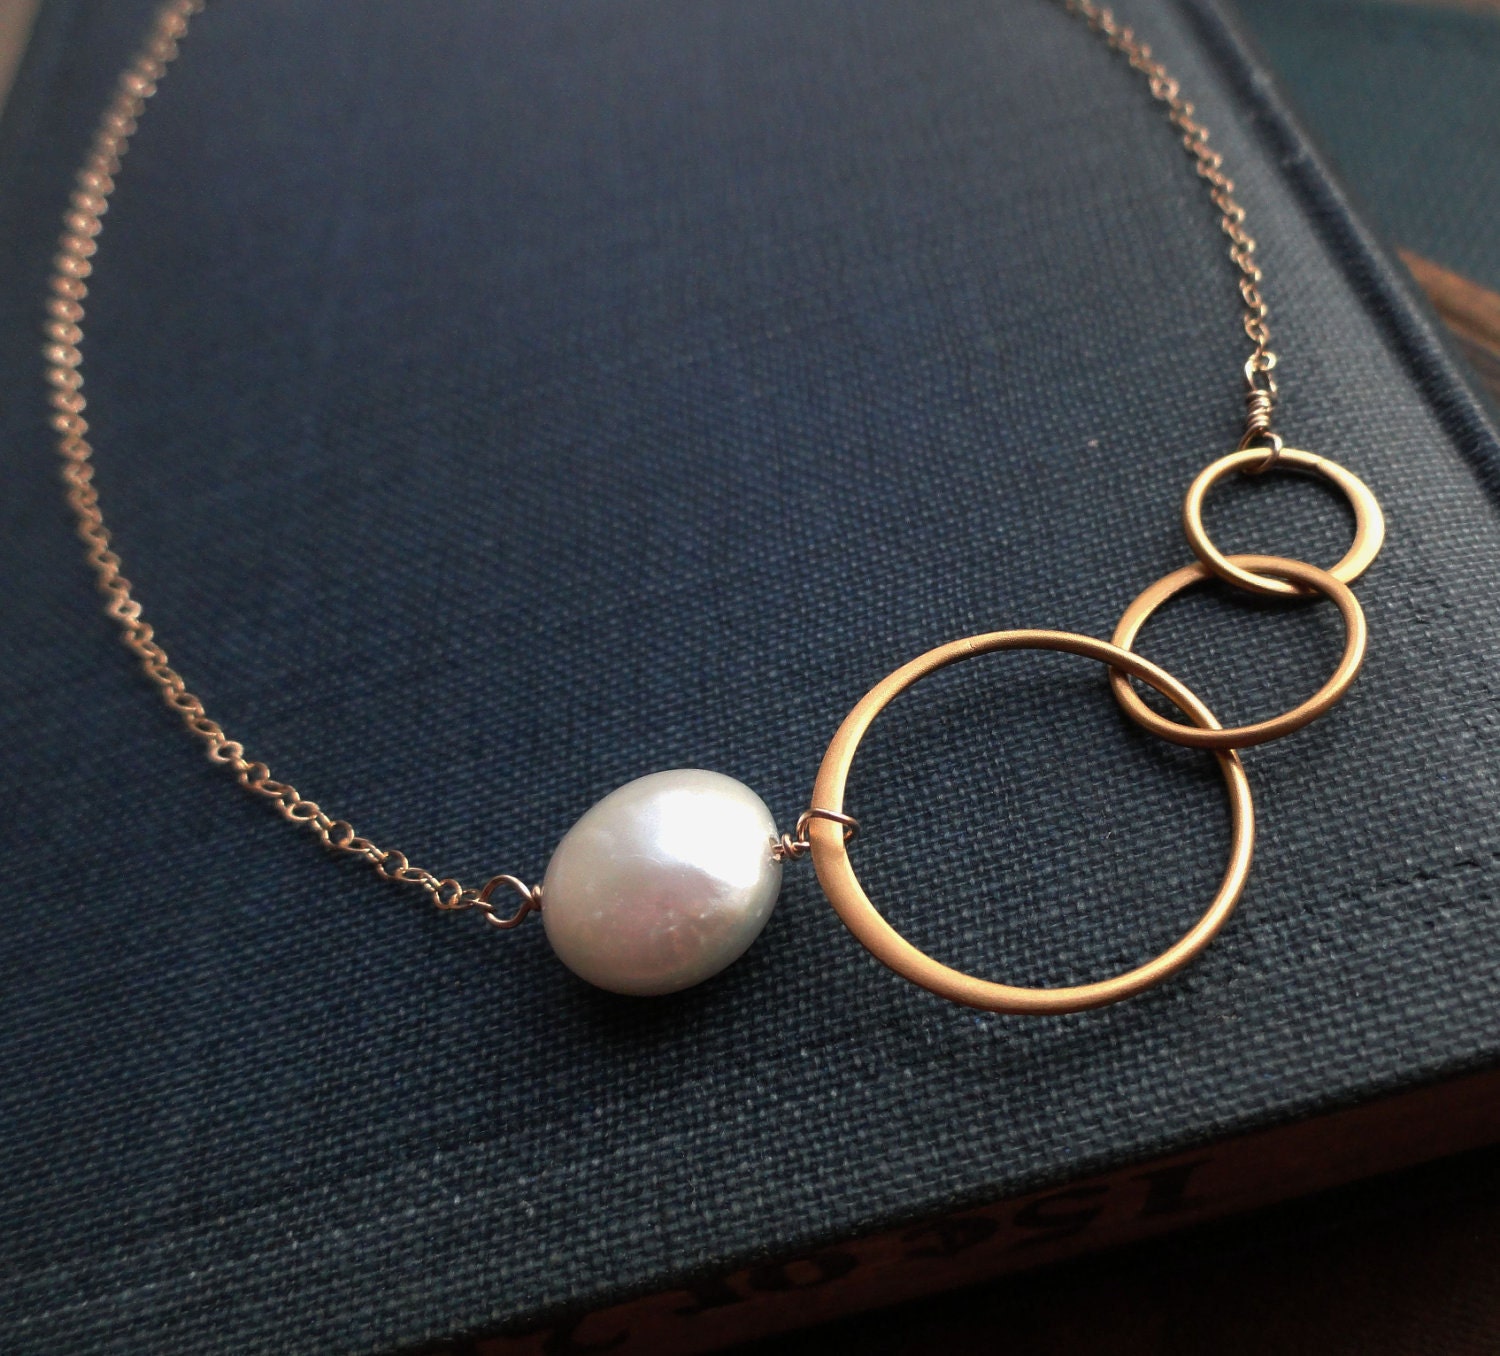 gold karma necklace, Freshwater pearl, bridesmaid gifts, eternity necklace, entwined rings, sisters, best friends, circle necklace